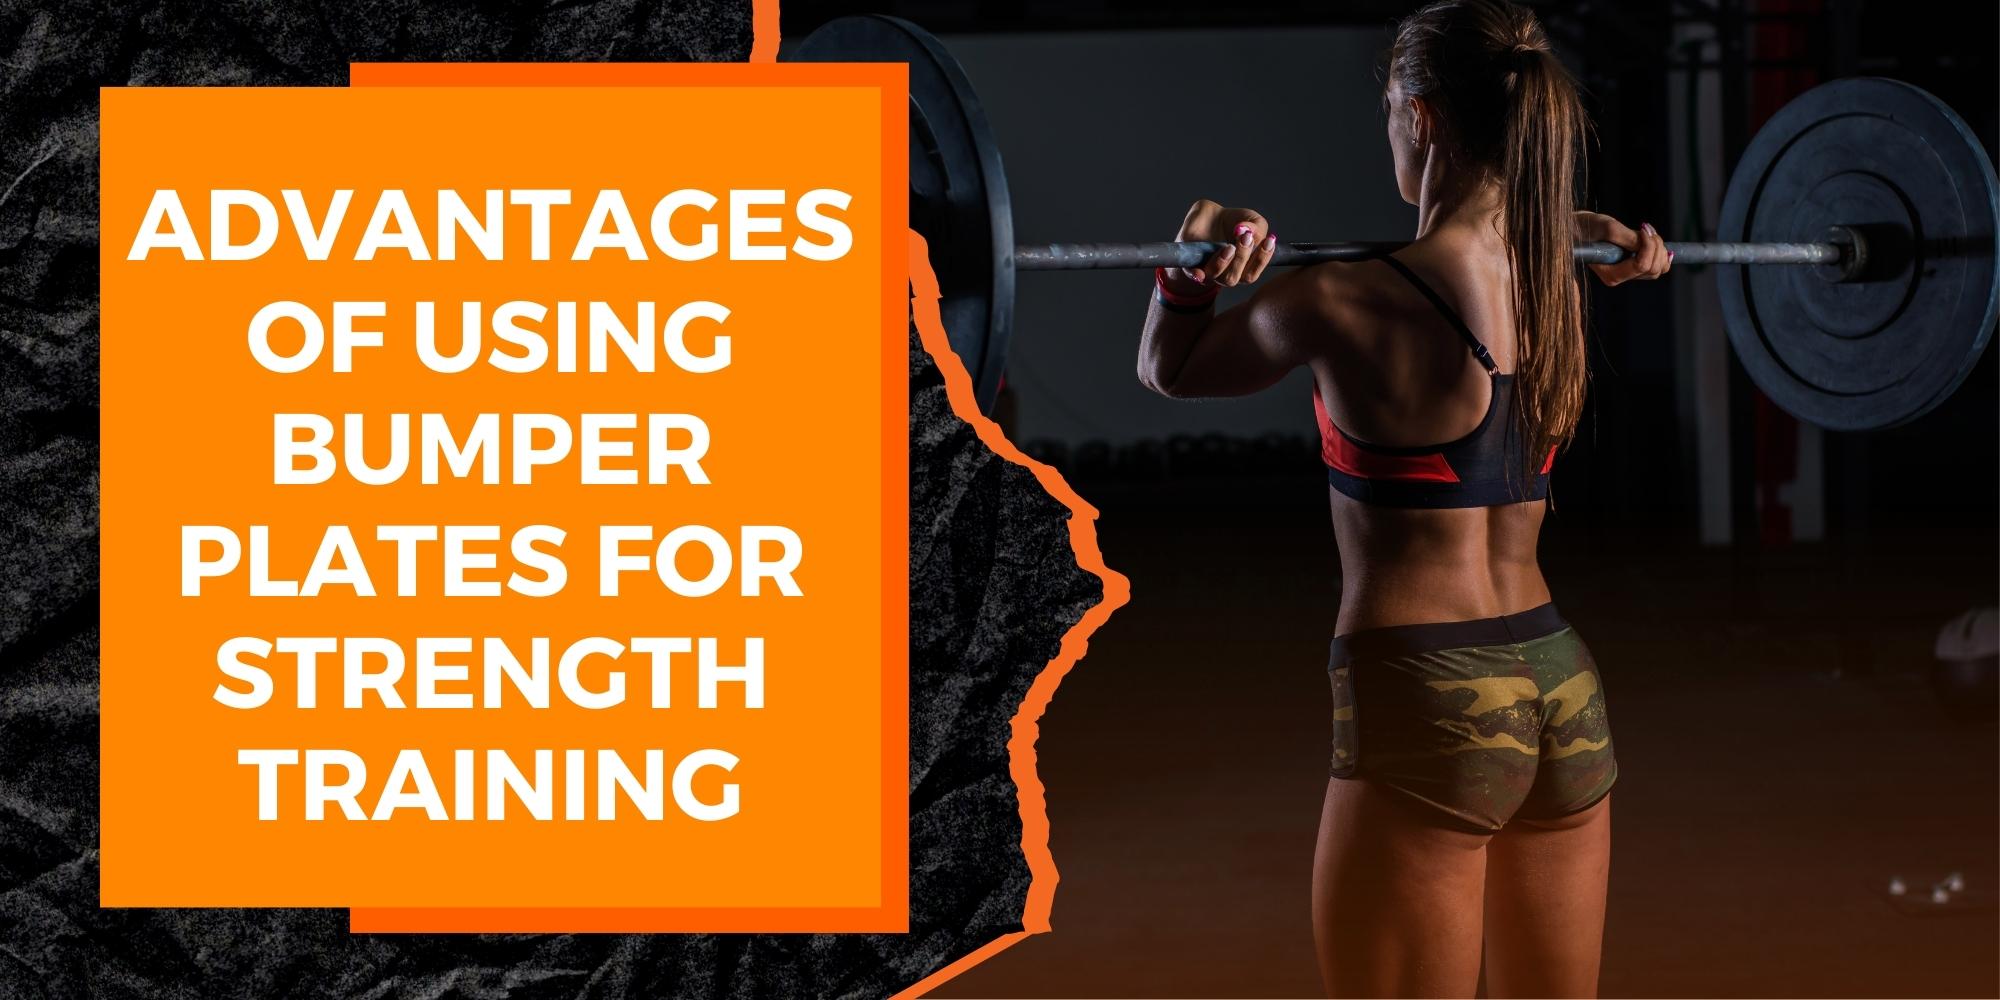 The Advantages of Using Bumper Plates for Strength Training